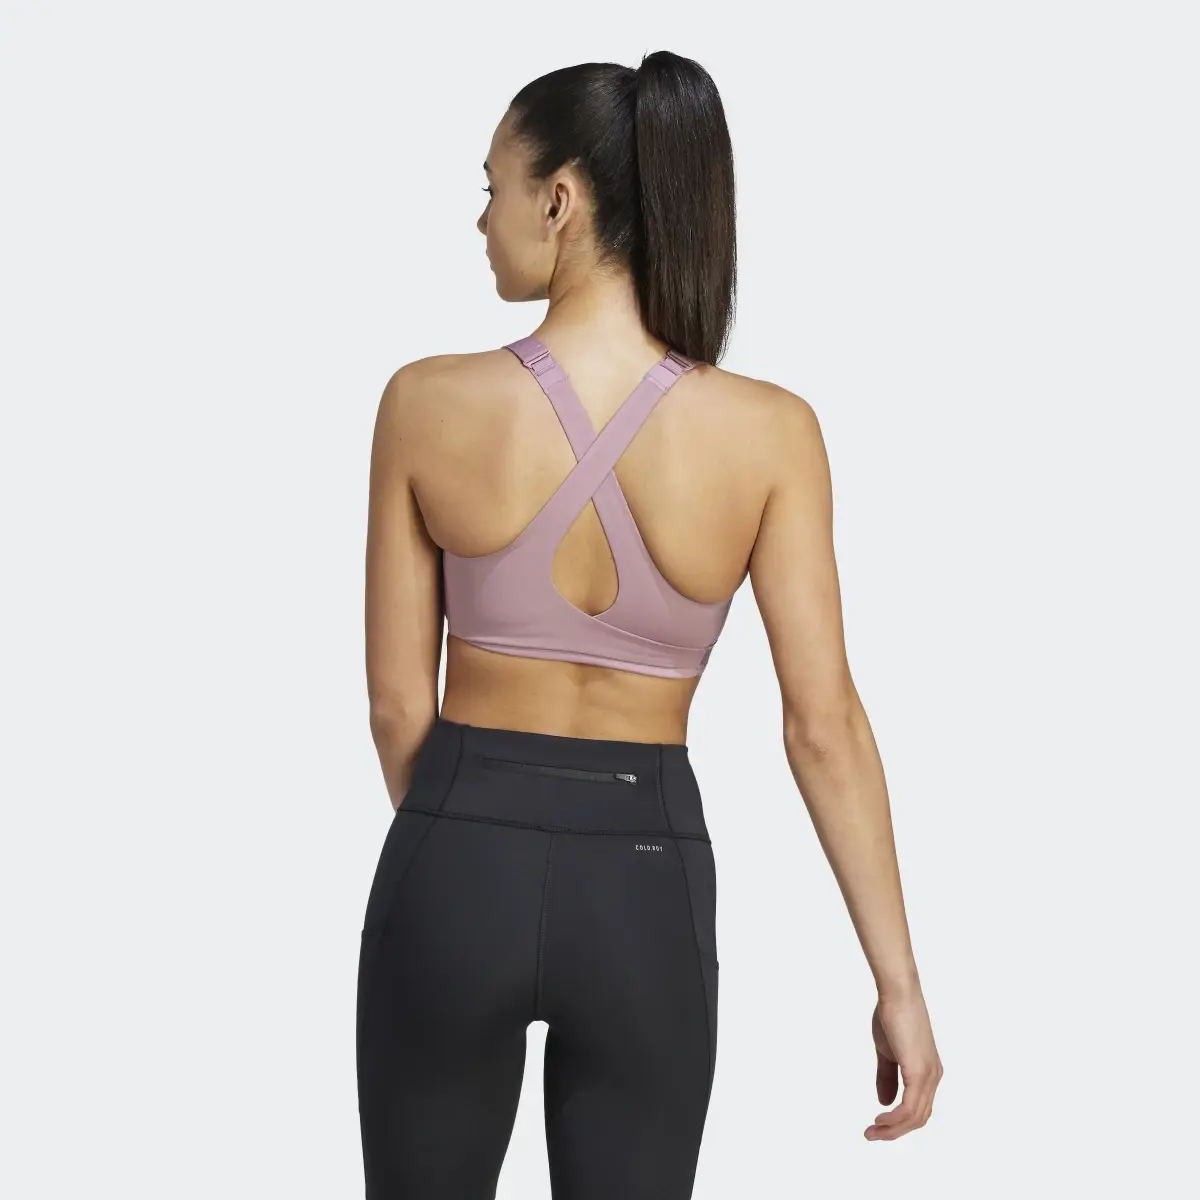 Adidas Brassière Collective Power Fastimpact Luxe Maintien fort. 3